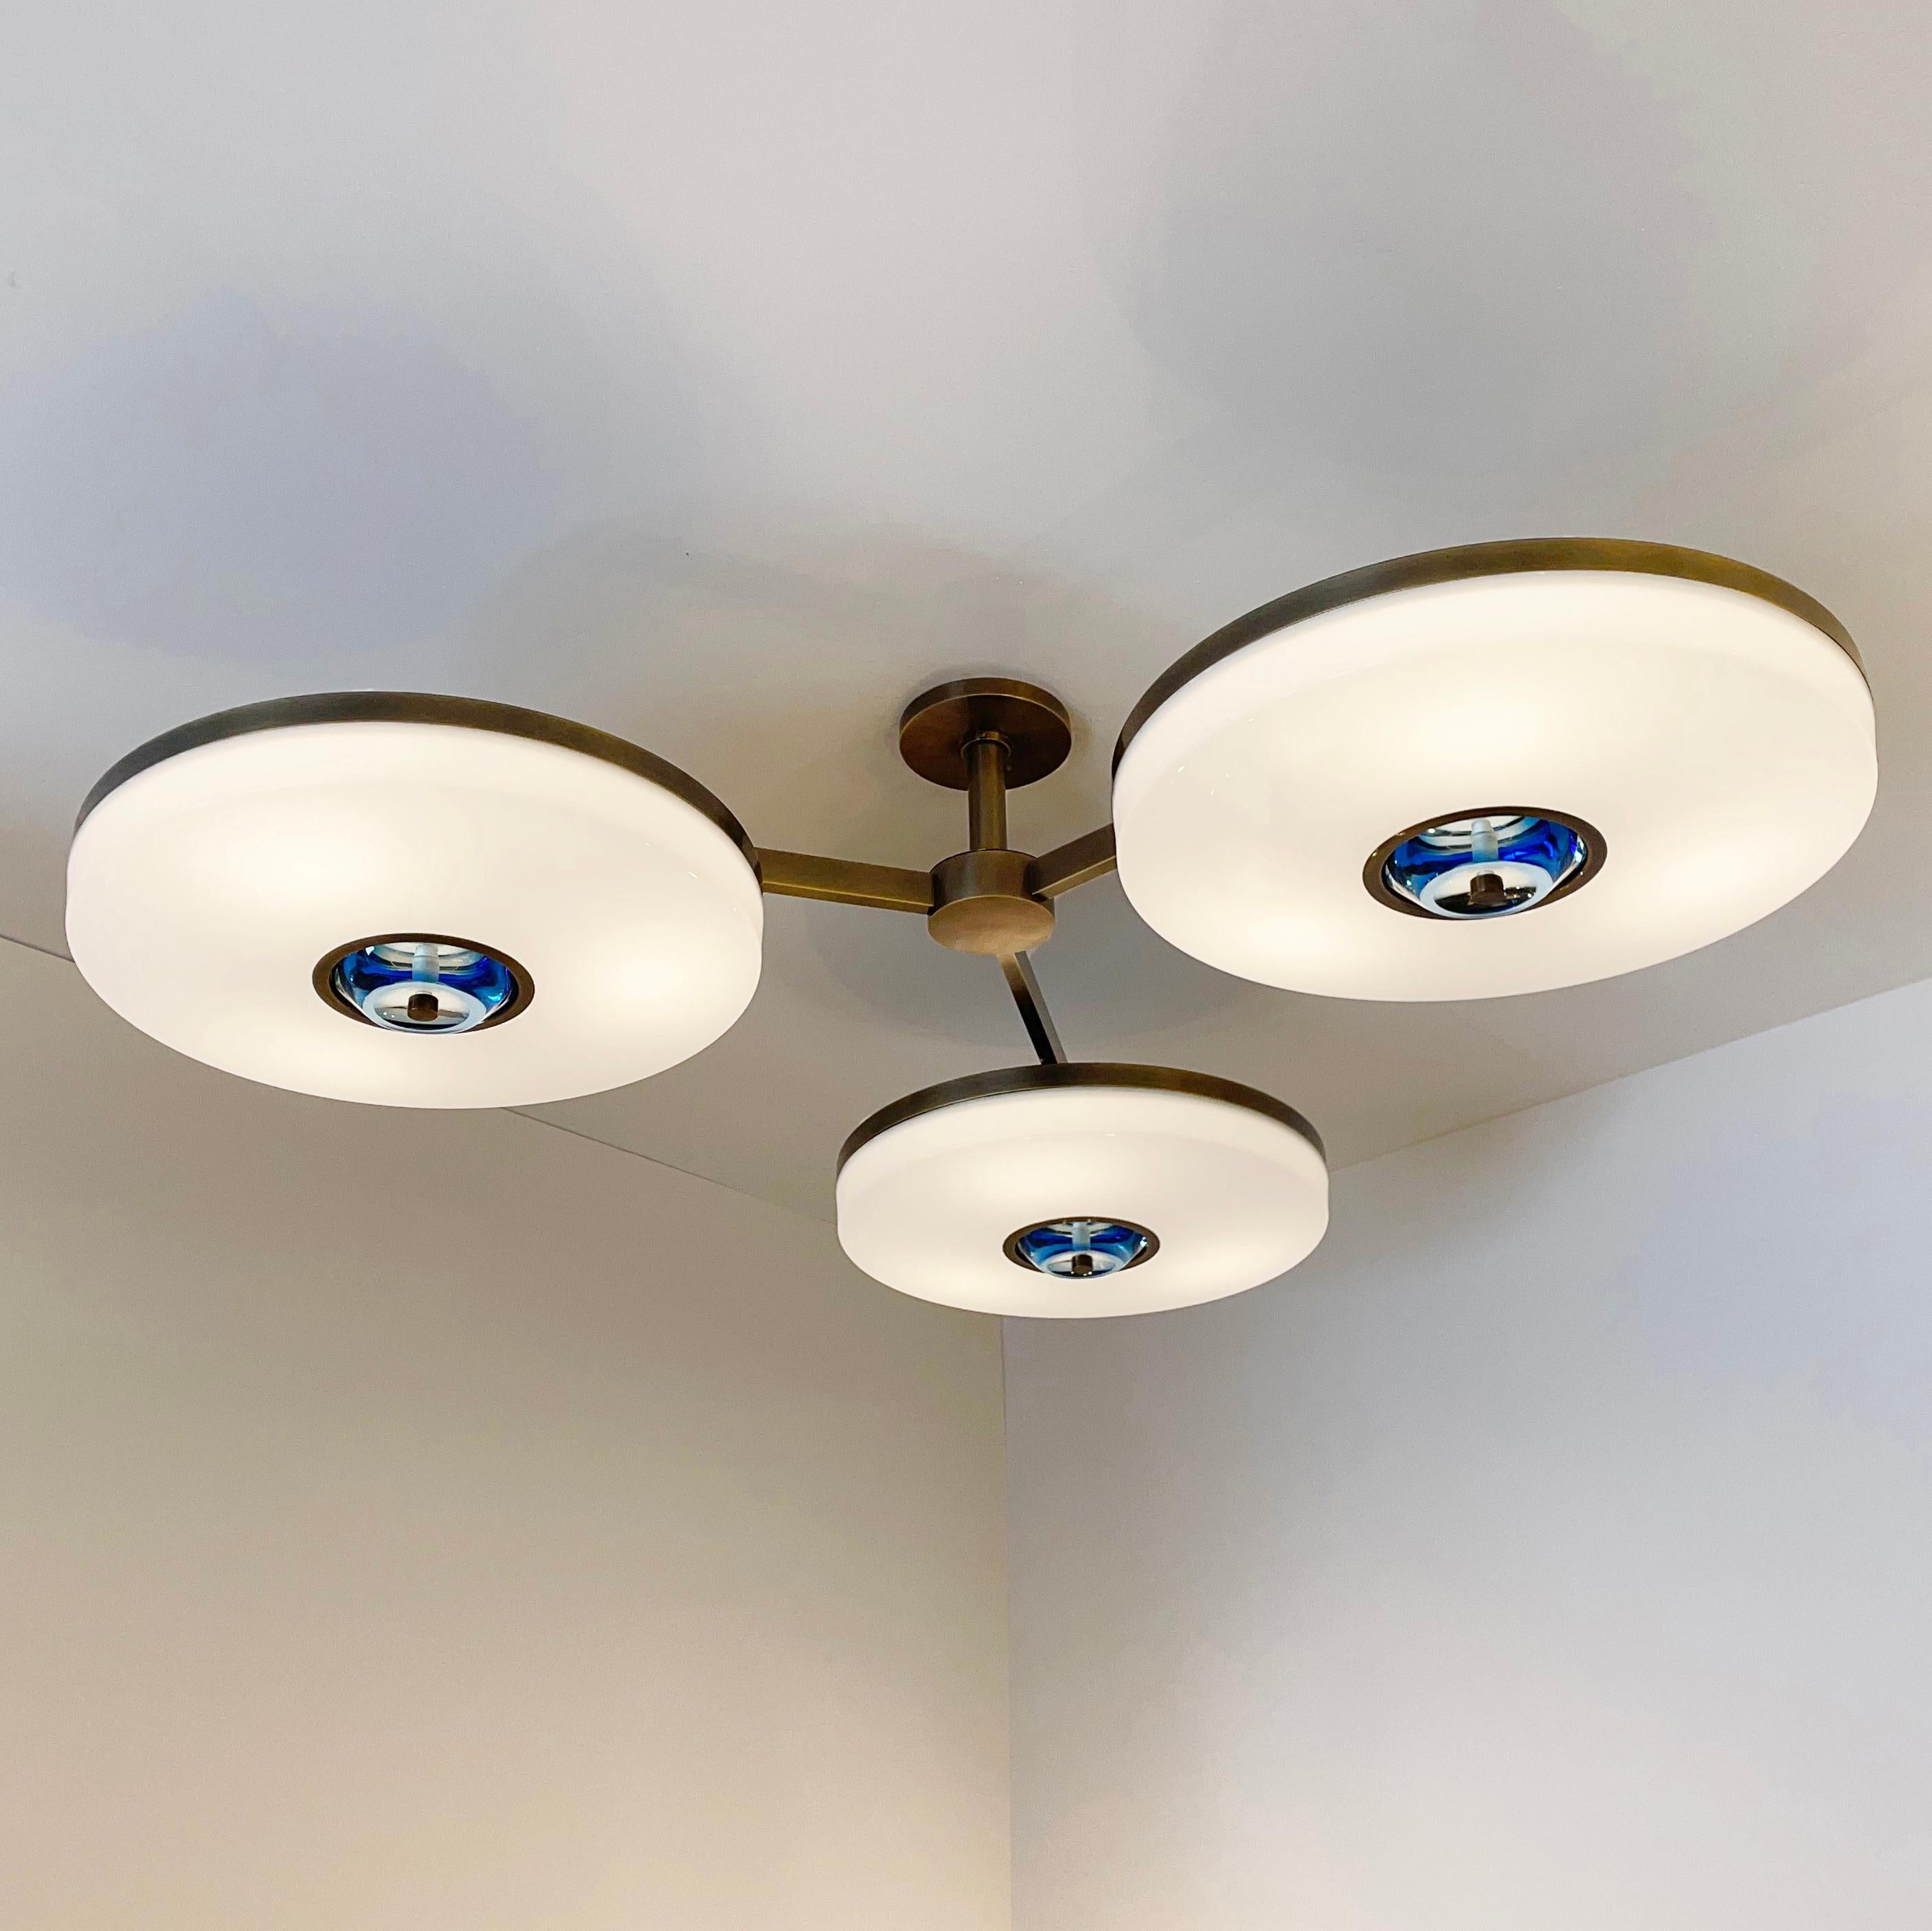 The Iris N.3 ceiling light is designed around three expansive acrylic shades with hand carved glass centers. This versatile fixture can be installed on a stem or as a flush mount. The first images show the fixture in our Bronzo Ottone finish